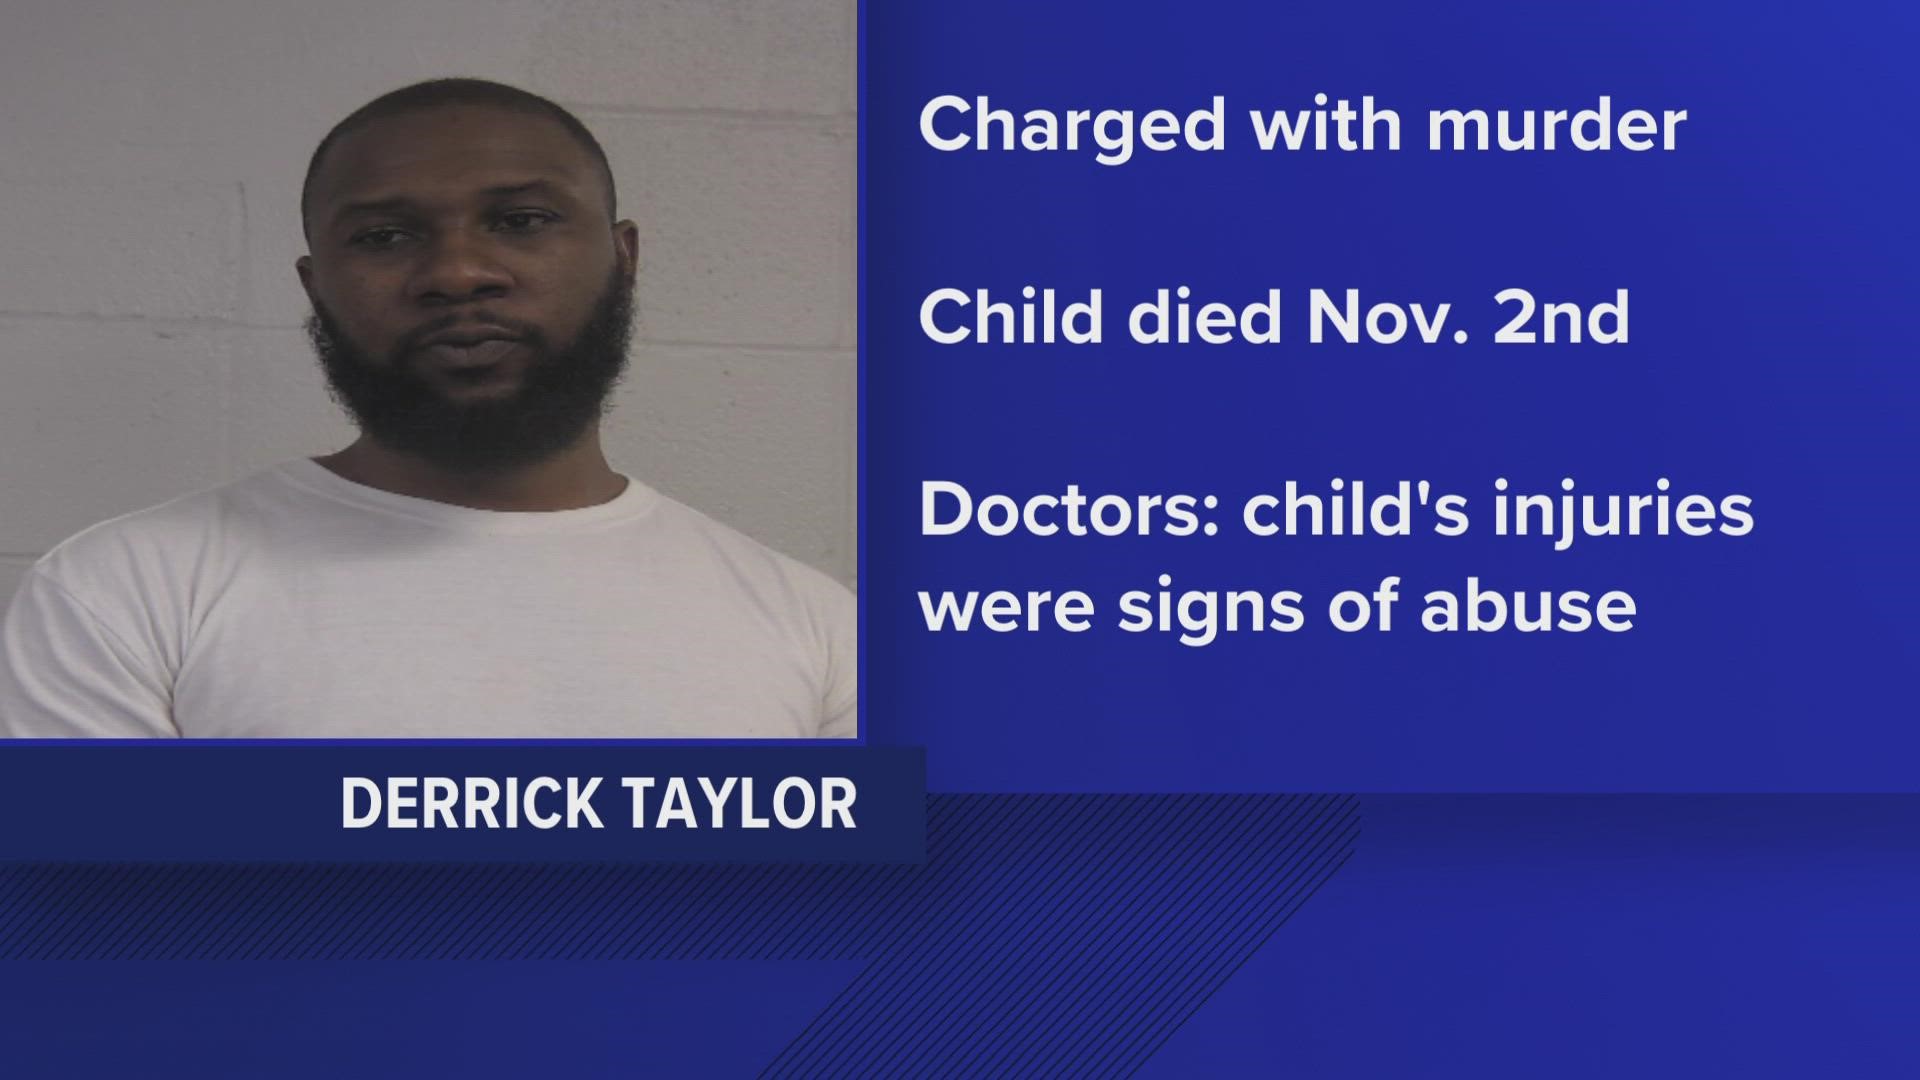 Derrick Taylor is facing murder charges after an initial call for a child having trouble breathing turned into a deadly abuse investigation.